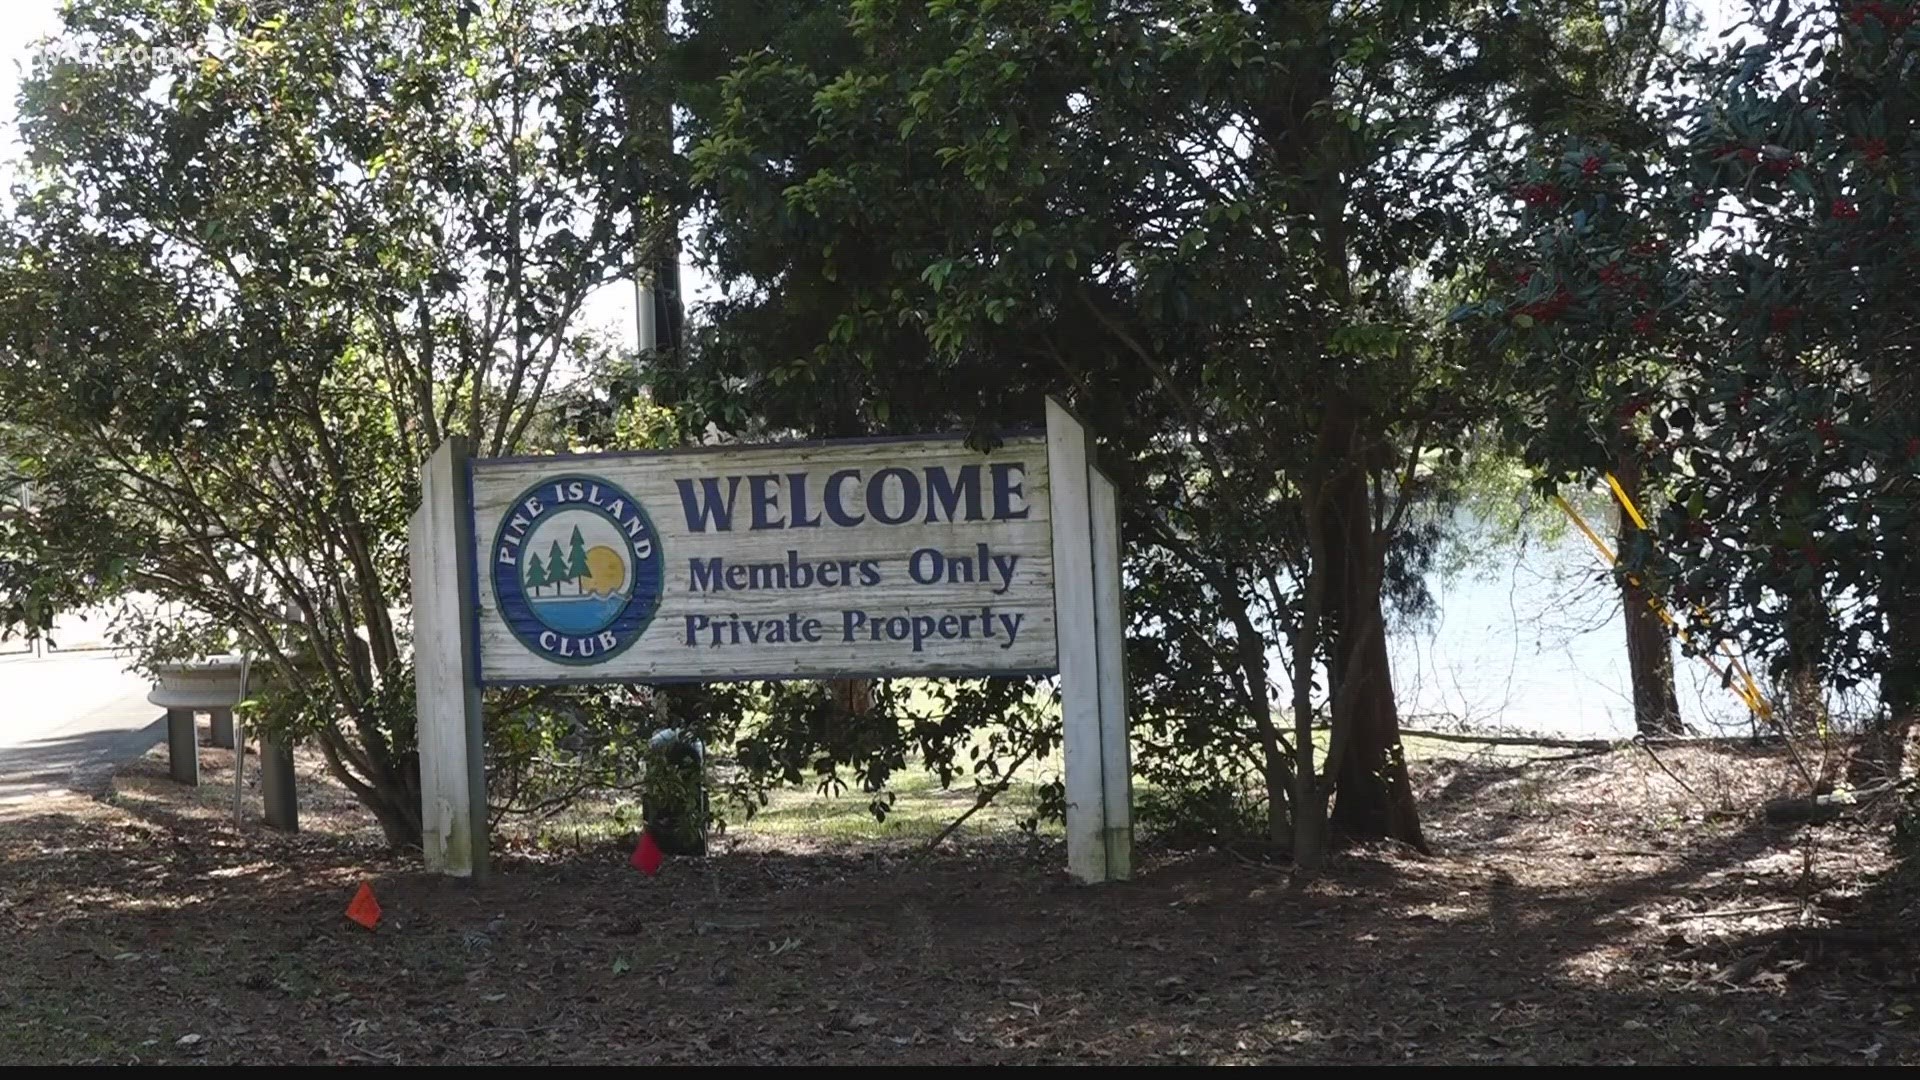 For the first time sine 2006 the South Carolina Department of Parks and Recreation is working on expanding with two new parks.